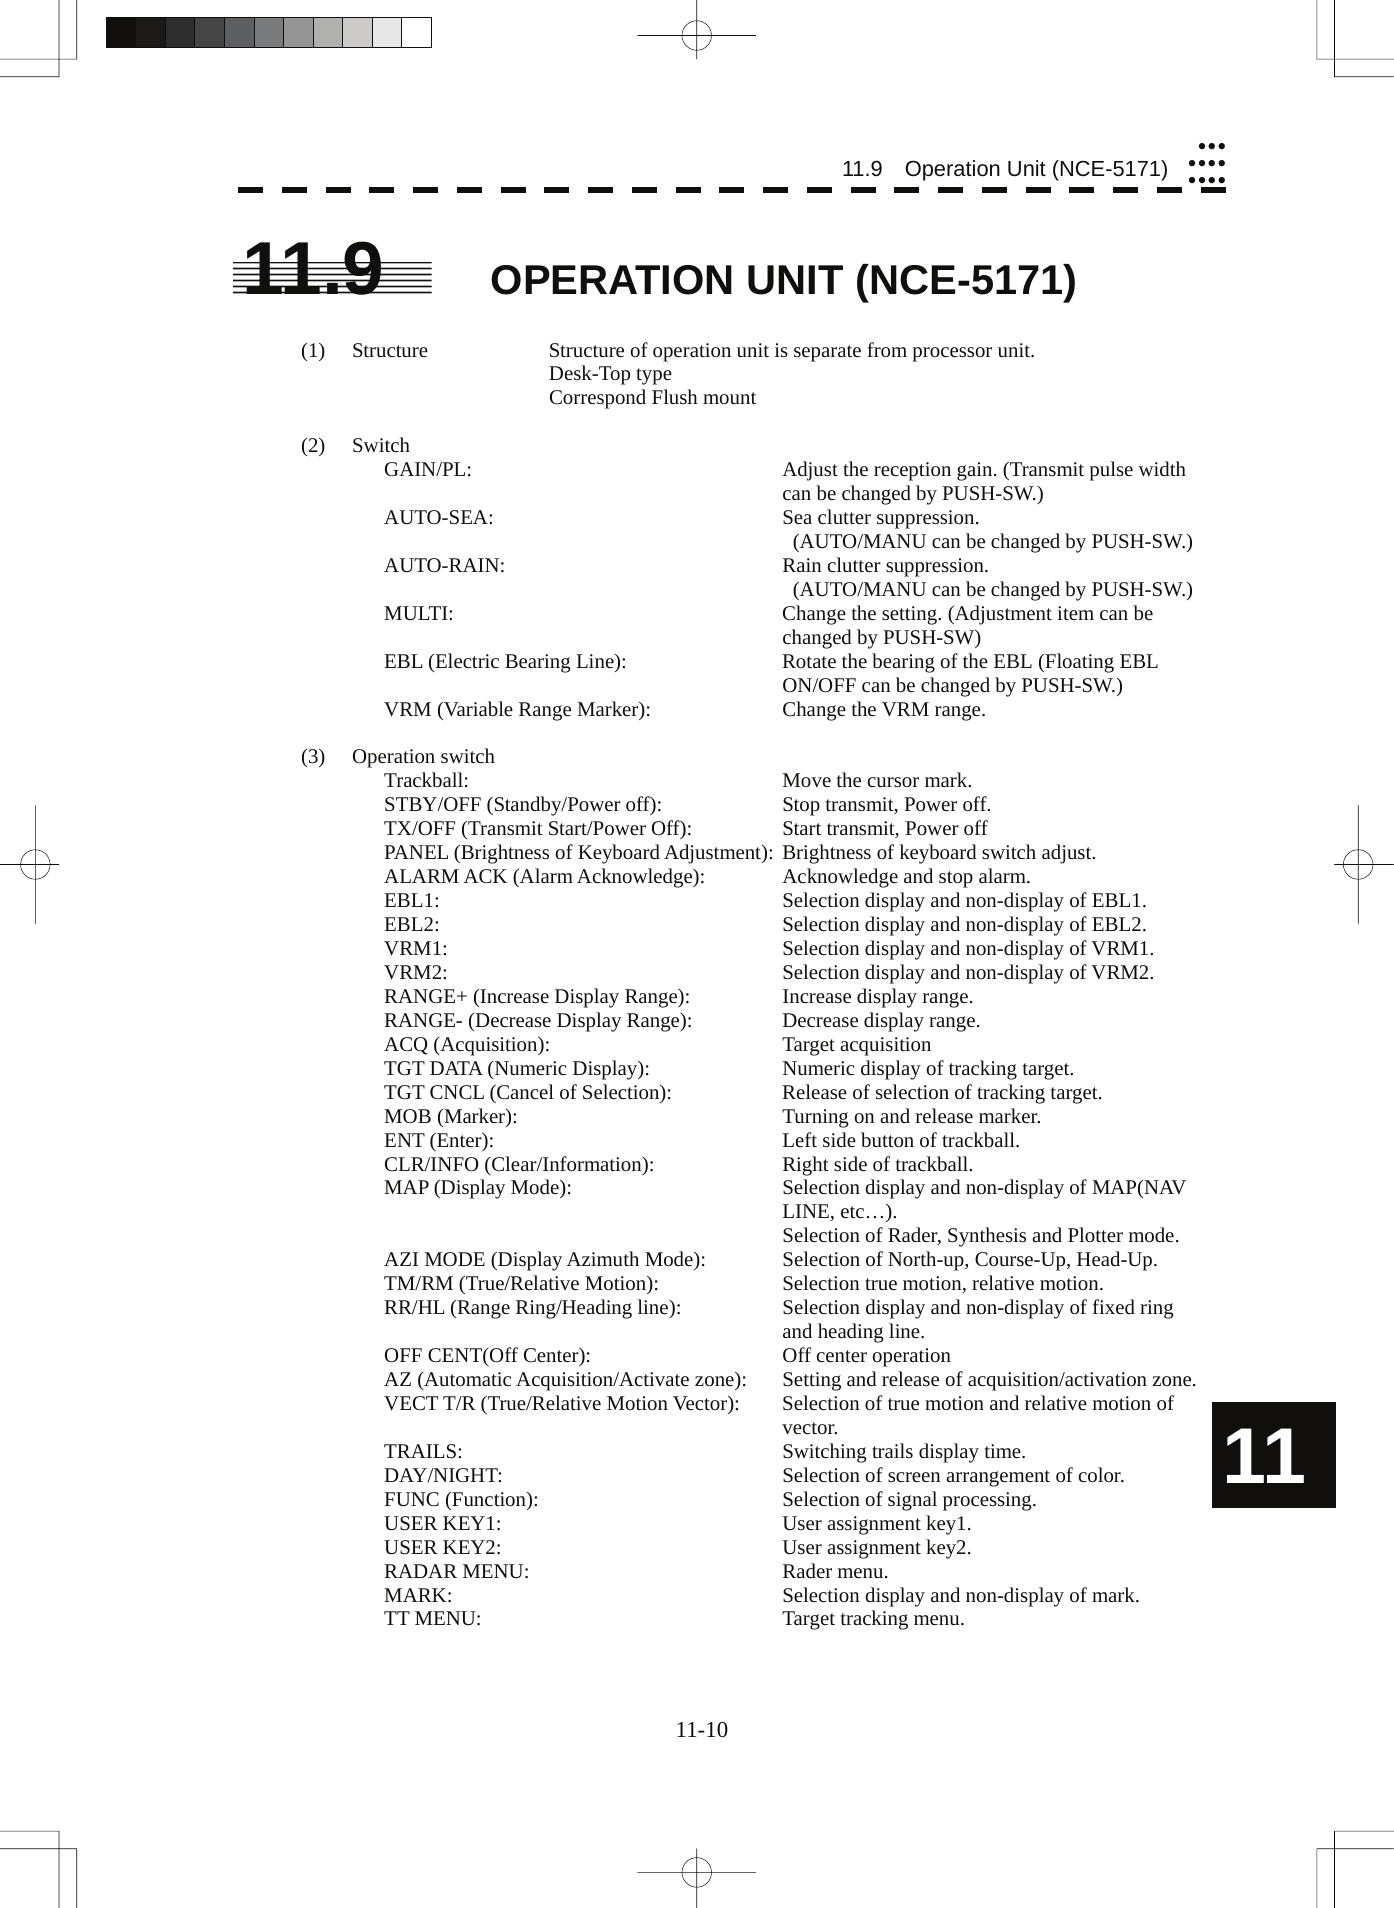  11-10 11.9  Operation Unit (NCE-5171)yyyyyyyyyyy11 11.9 OPERATION UNIT (NCE-5171)  (1)  Structure  Structure of operation unit is separate from processor unit.    Desk-Top type     Correspond Flush mount  (2) Switch GAIN/PL:  Adjust the reception gain. (Transmit pulse width can be changed by PUSH-SW.) AUTO-SEA:  Sea clutter suppression.   (AUTO/MANU can be changed by PUSH-SW.) AUTO-RAIN:  Rain clutter suppression.   (AUTO/MANU can be changed by PUSH-SW.) MULTI:  Change the setting. (Adjustment item can be changed by PUSH-SW) EBL (Electric Bearing Line):  Rotate the bearing of the EBL (Floating EBL ON/OFF can be changed by PUSH-SW.) VRM (Variable Range Marker):  Change the VRM range.  (3) Operation switch Trackball:  Move the cursor mark. STBY/OFF (Standby/Power off):  Stop transmit, Power off. TX/OFF (Transmit Start/Power Off):  Start transmit, Power off PANEL (Brightness of Keyboard Adjustment): Brightness of keyboard switch adjust. ALARM ACK (Alarm Acknowledge):  Acknowledge and stop alarm. EBL1:  Selection display and non-display of EBL1. EBL2:  Selection display and non-display of EBL2. VRM1:  Selection display and non-display of VRM1. VRM2:  Selection display and non-display of VRM2. RANGE+ (Increase Display Range): Increase display range. RANGE- (Decrease Display Range):  Decrease display range. ACQ (Acquisition):  Target acquisition TGT DATA (Numeric Display):  Numeric display of tracking target. TGT CNCL (Cancel of Selection):  Release of selection of tracking target. MOB (Marker):  Turning on and release marker. ENT (Enter):  Left side button of trackball. CLR/INFO (Clear/Information):  Right side of trackball. MAP (Display Mode):  Selection display and non-display of MAP(NAV LINE, etc…).   Selection of Rader, Synthesis and Plotter mode. AZI MODE (Display Azimuth Mode):  Selection of North-up, Course-Up, Head-Up. TM/RM (True/Relative Motion):  Selection true motion, relative motion. RR/HL (Range Ring/Heading line):  Selection display and non-display of fixed ring and heading line. OFF CENT(Off Center):  Off center operation AZ (Automatic Acquisition/Activate zone):  Setting and release of acquisition/activation zone. VECT T/R (True/Relative Motion Vector):  Selection of true motion and relative motion of vector. TRAILS:  Switching trails display time. DAY/NIGHT: Selection of screen arrangement of color. FUNC (Function):  Selection of signal processing. USER KEY1:  User assignment key1. USER KEY2:  User assignment key2. RADAR MENU:  Rader menu. MARK:  Selection display and non-display of mark. TT MENU:  Target tracking menu.  